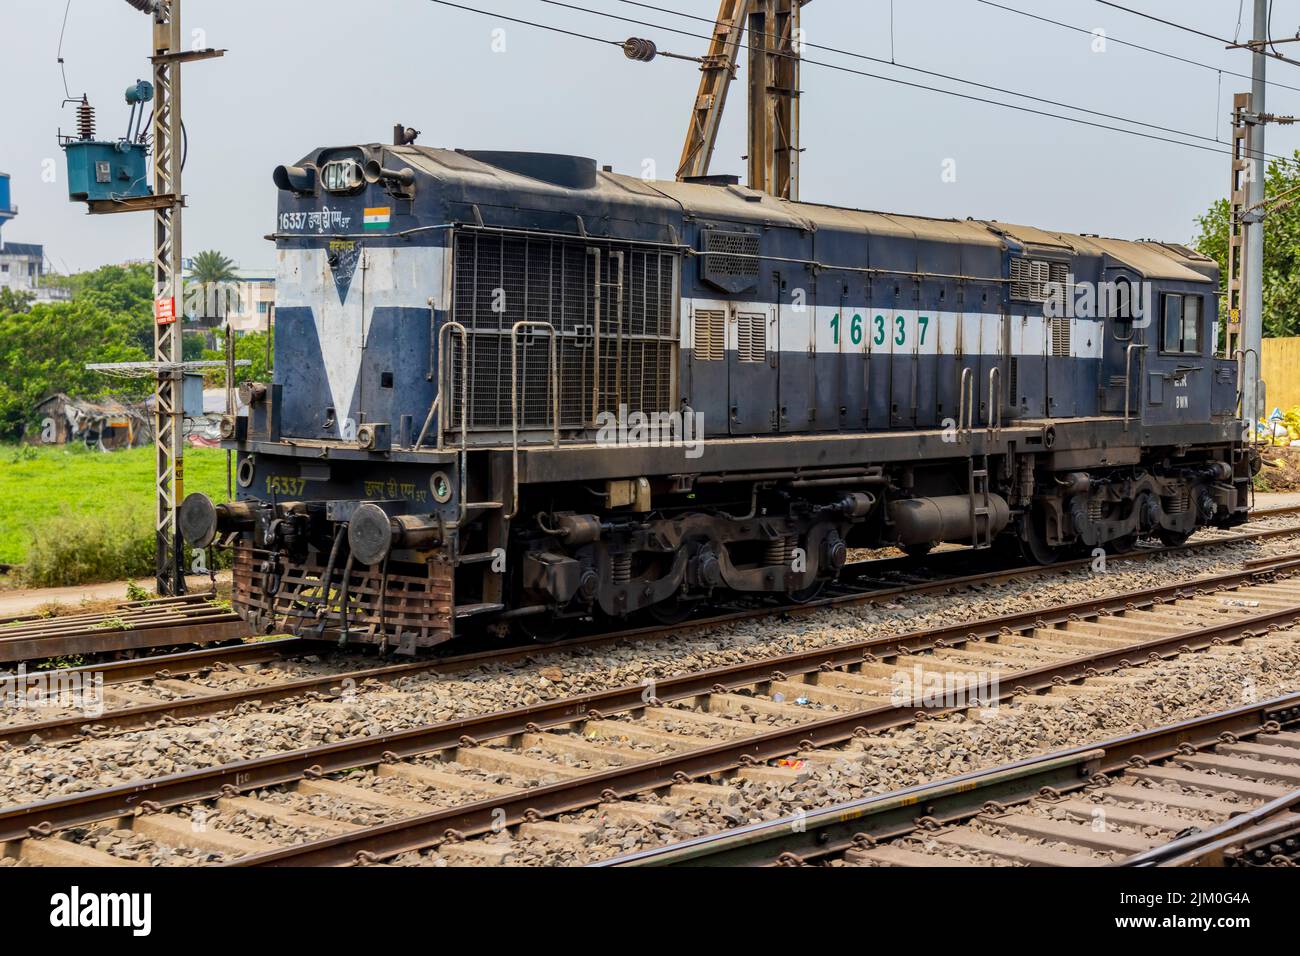 Bardhaman, India- April 21, 20122: A WDM diesel locomotive of the Indian Railways. This was developed in 1962 by the American Locomotive Company. Stock Photo